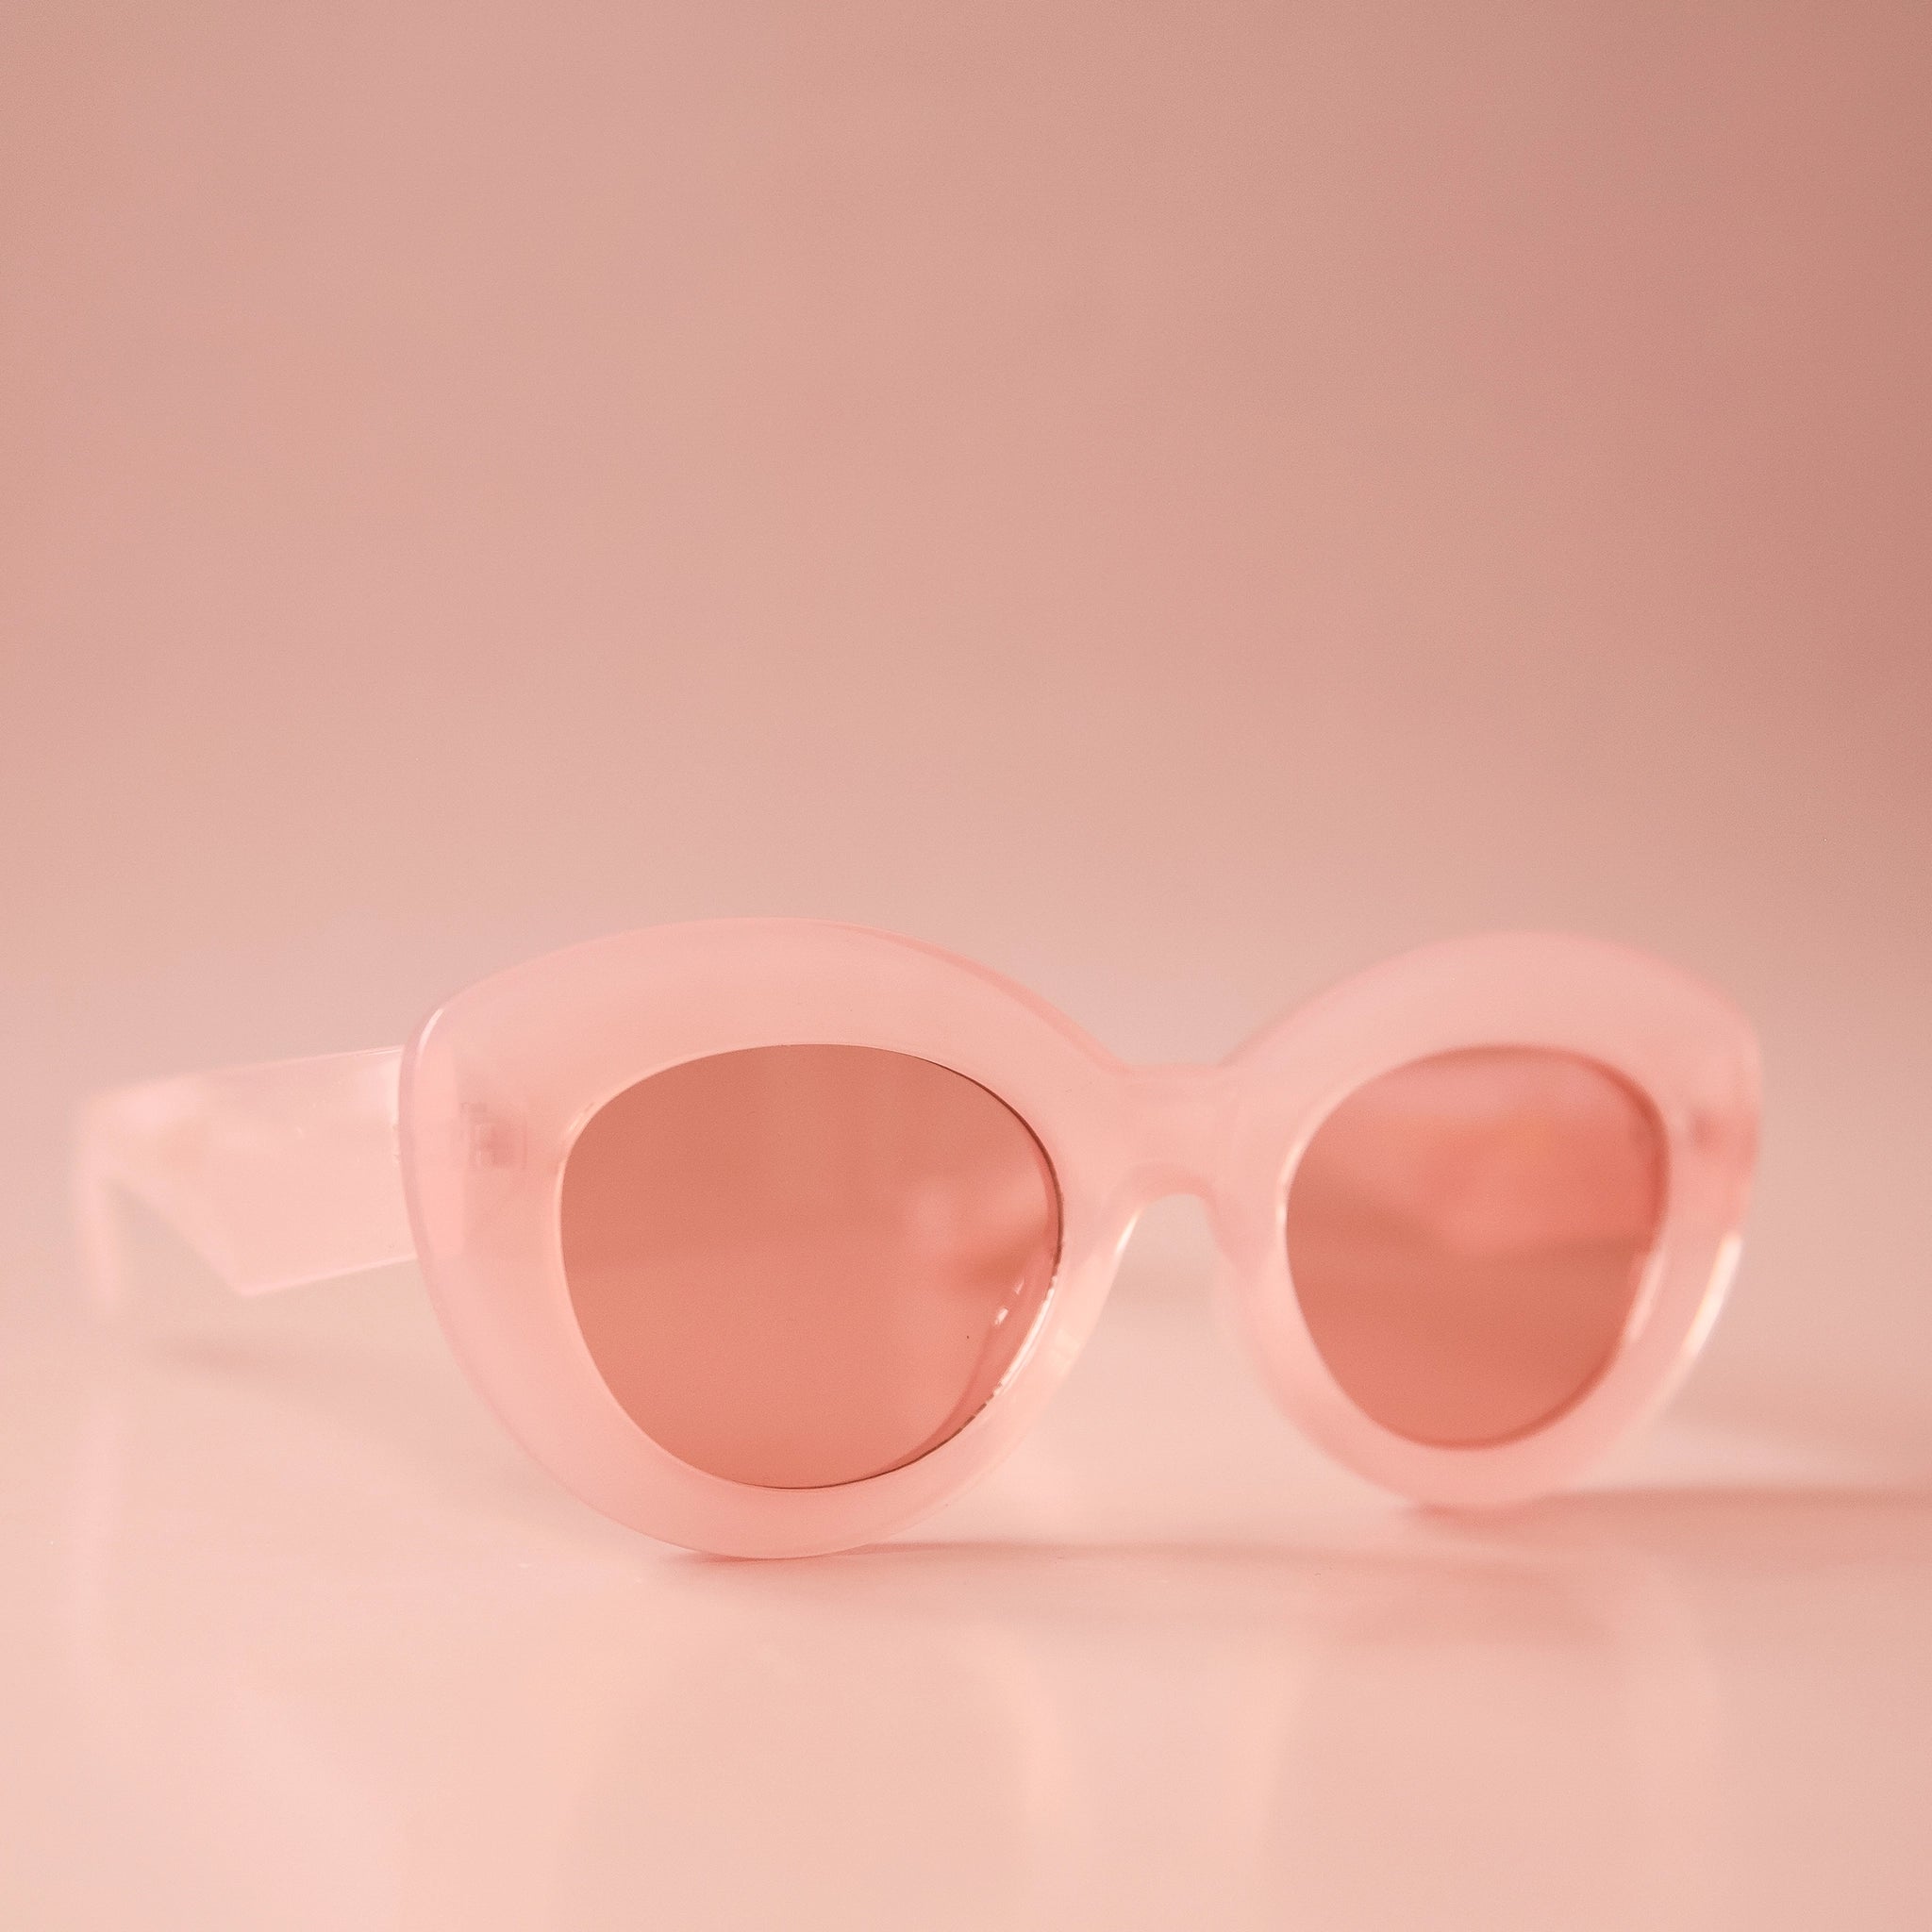 On a light peachy background is a pink pair of sunglasses with a rounded shape and a slight cateye at the corner along with a peachy lens. 